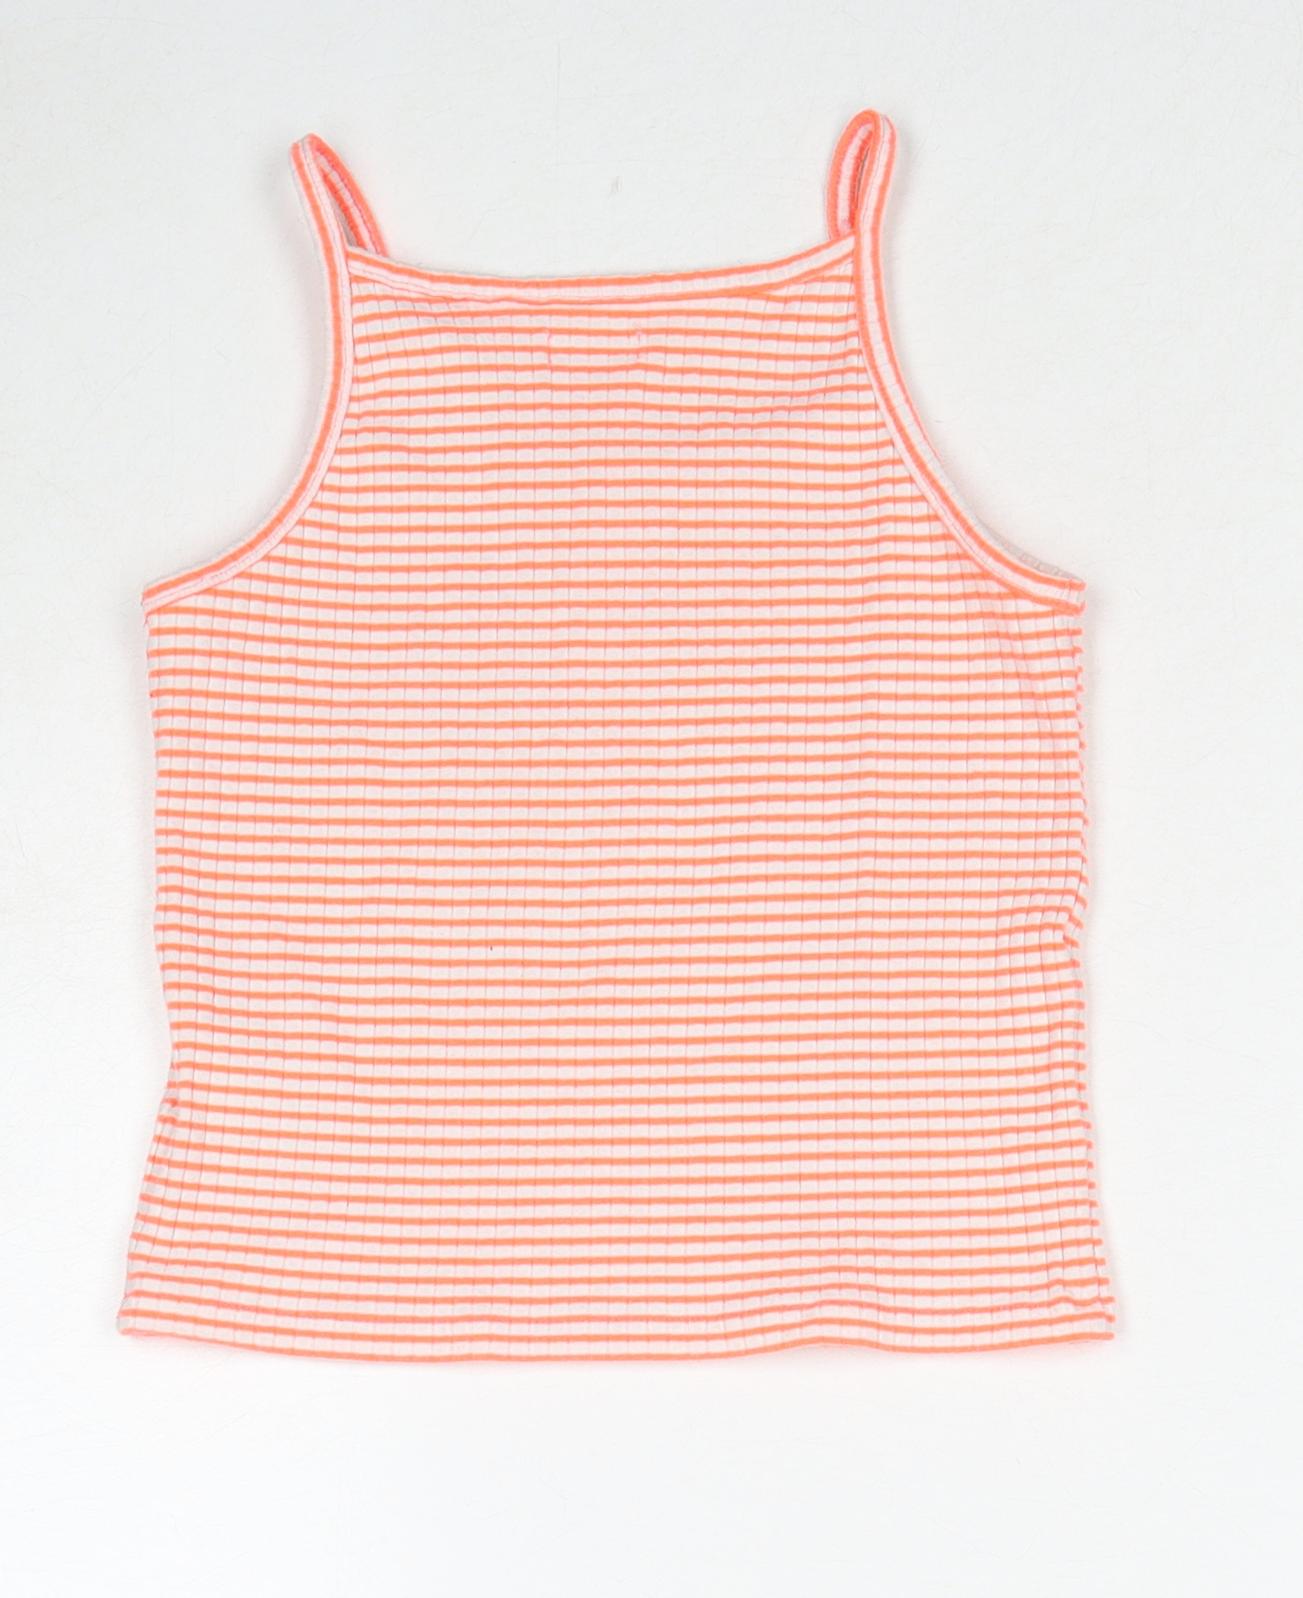 NEXT Girls Red Striped Cotton Camisole Tank Size 9 Years Scoop Neck Pullover